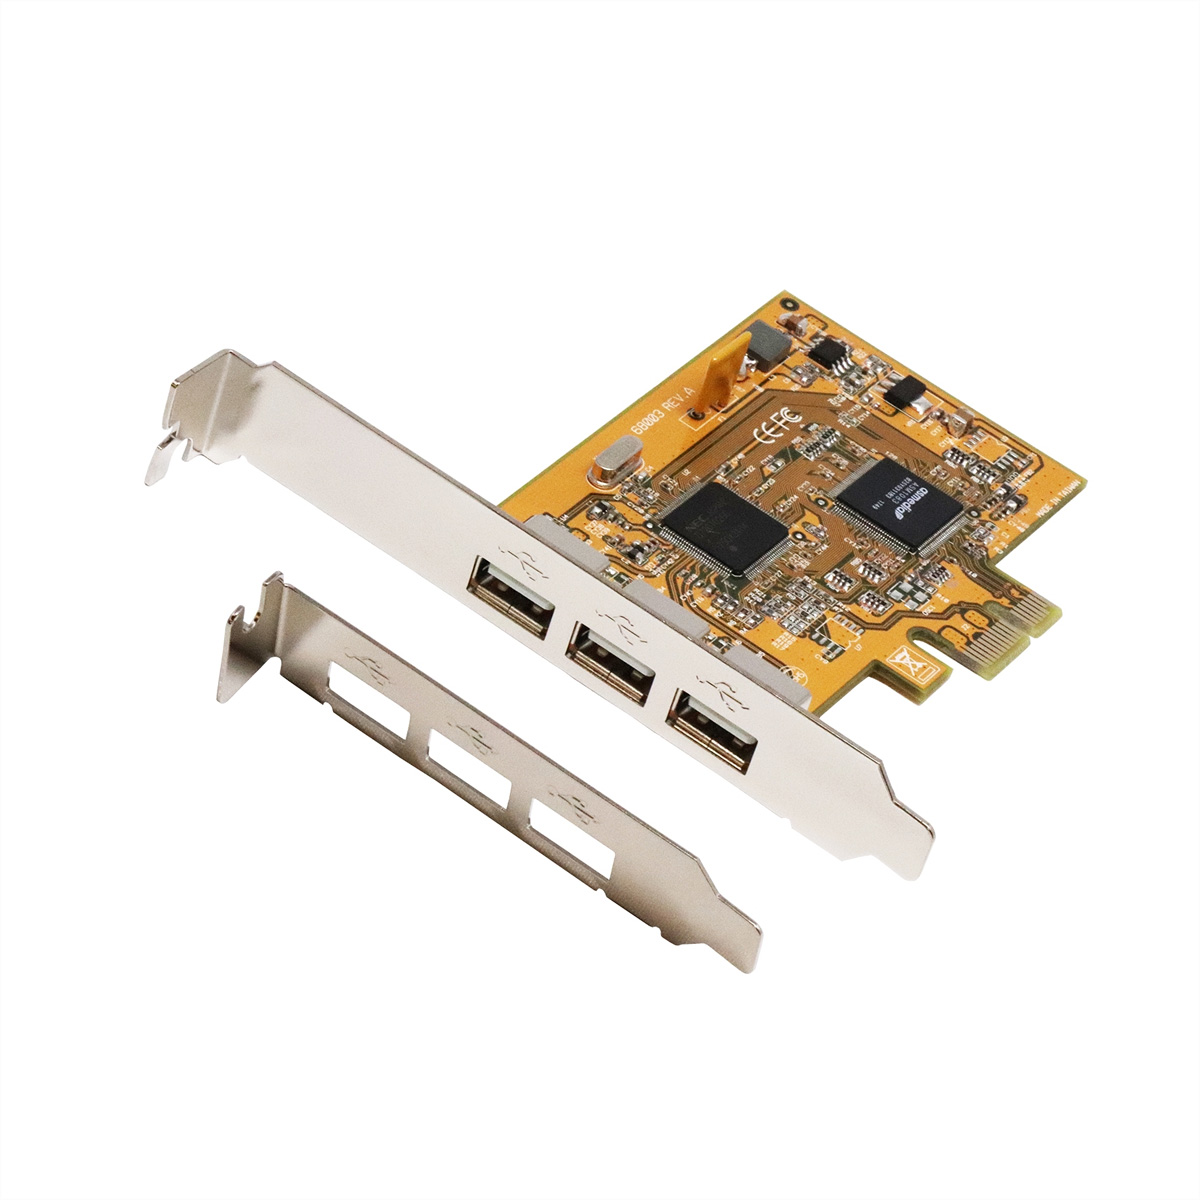 Exsys EX-11053 - USB-Adapter - PCIe Low-Profile